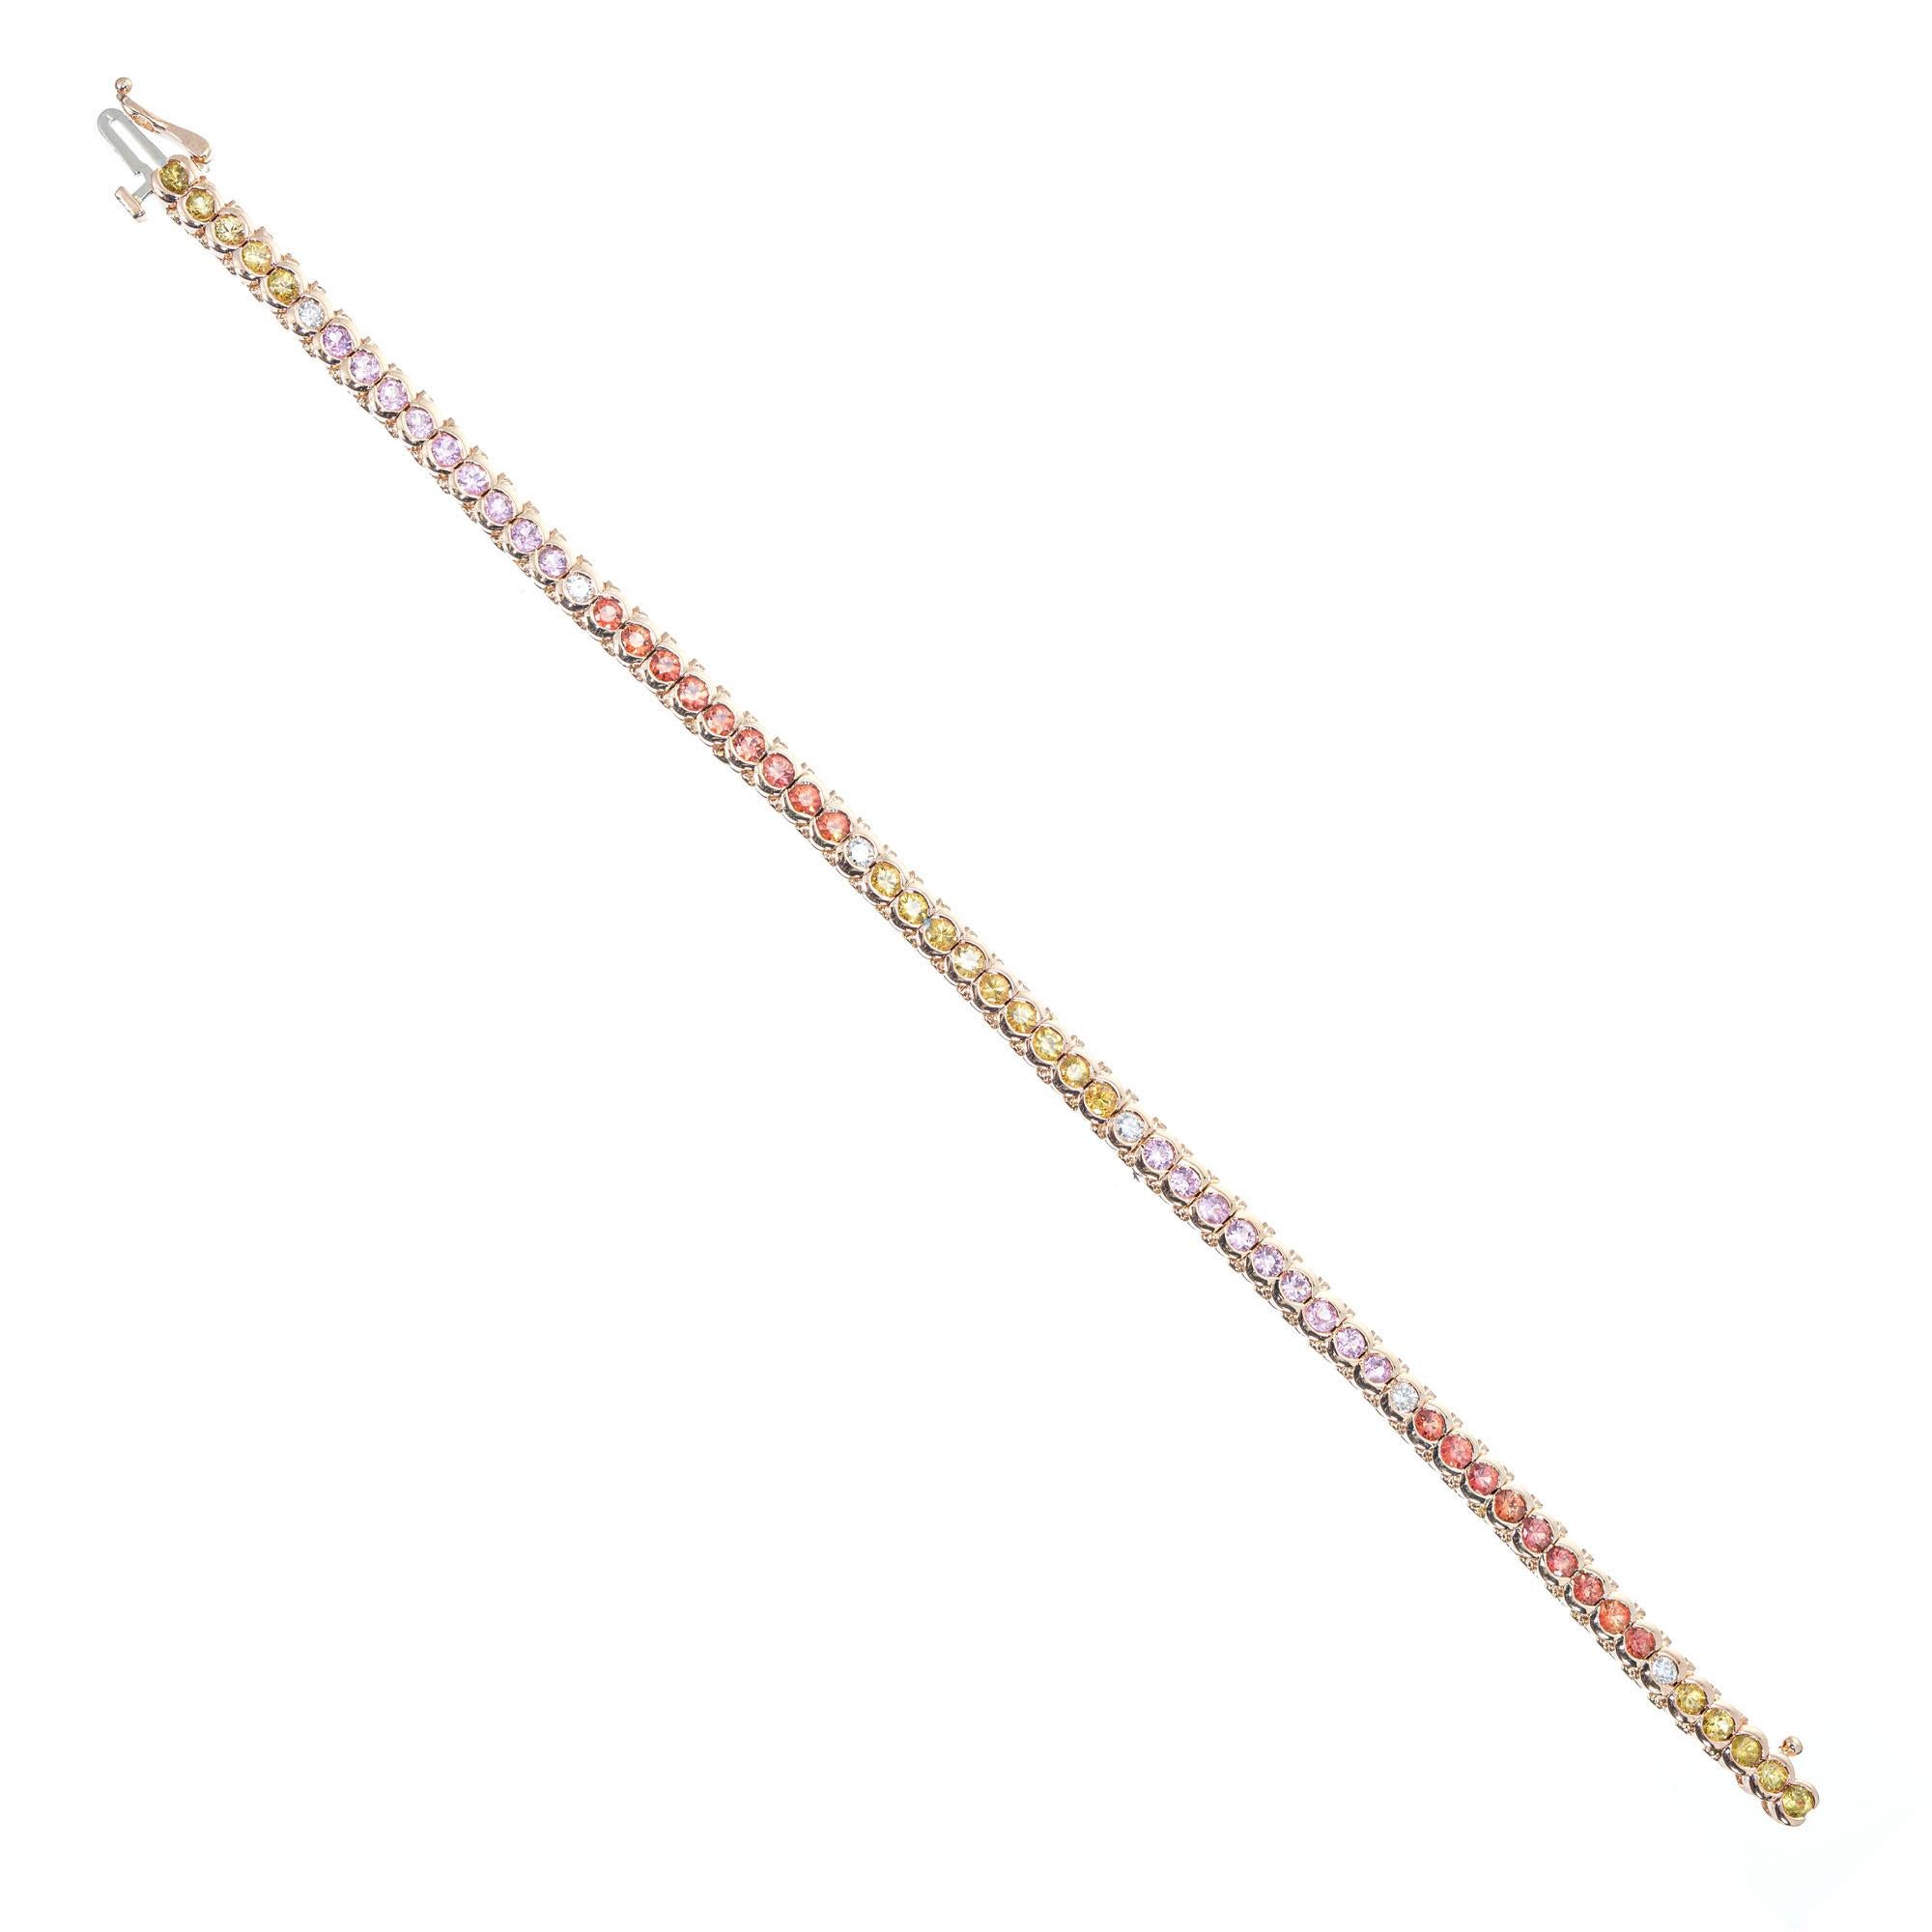 5.50 Carat Multicolor Sapphire Diamond Rose Gold Hinged Link Tennis Bracelet In Excellent Condition For Sale In Stamford, CT